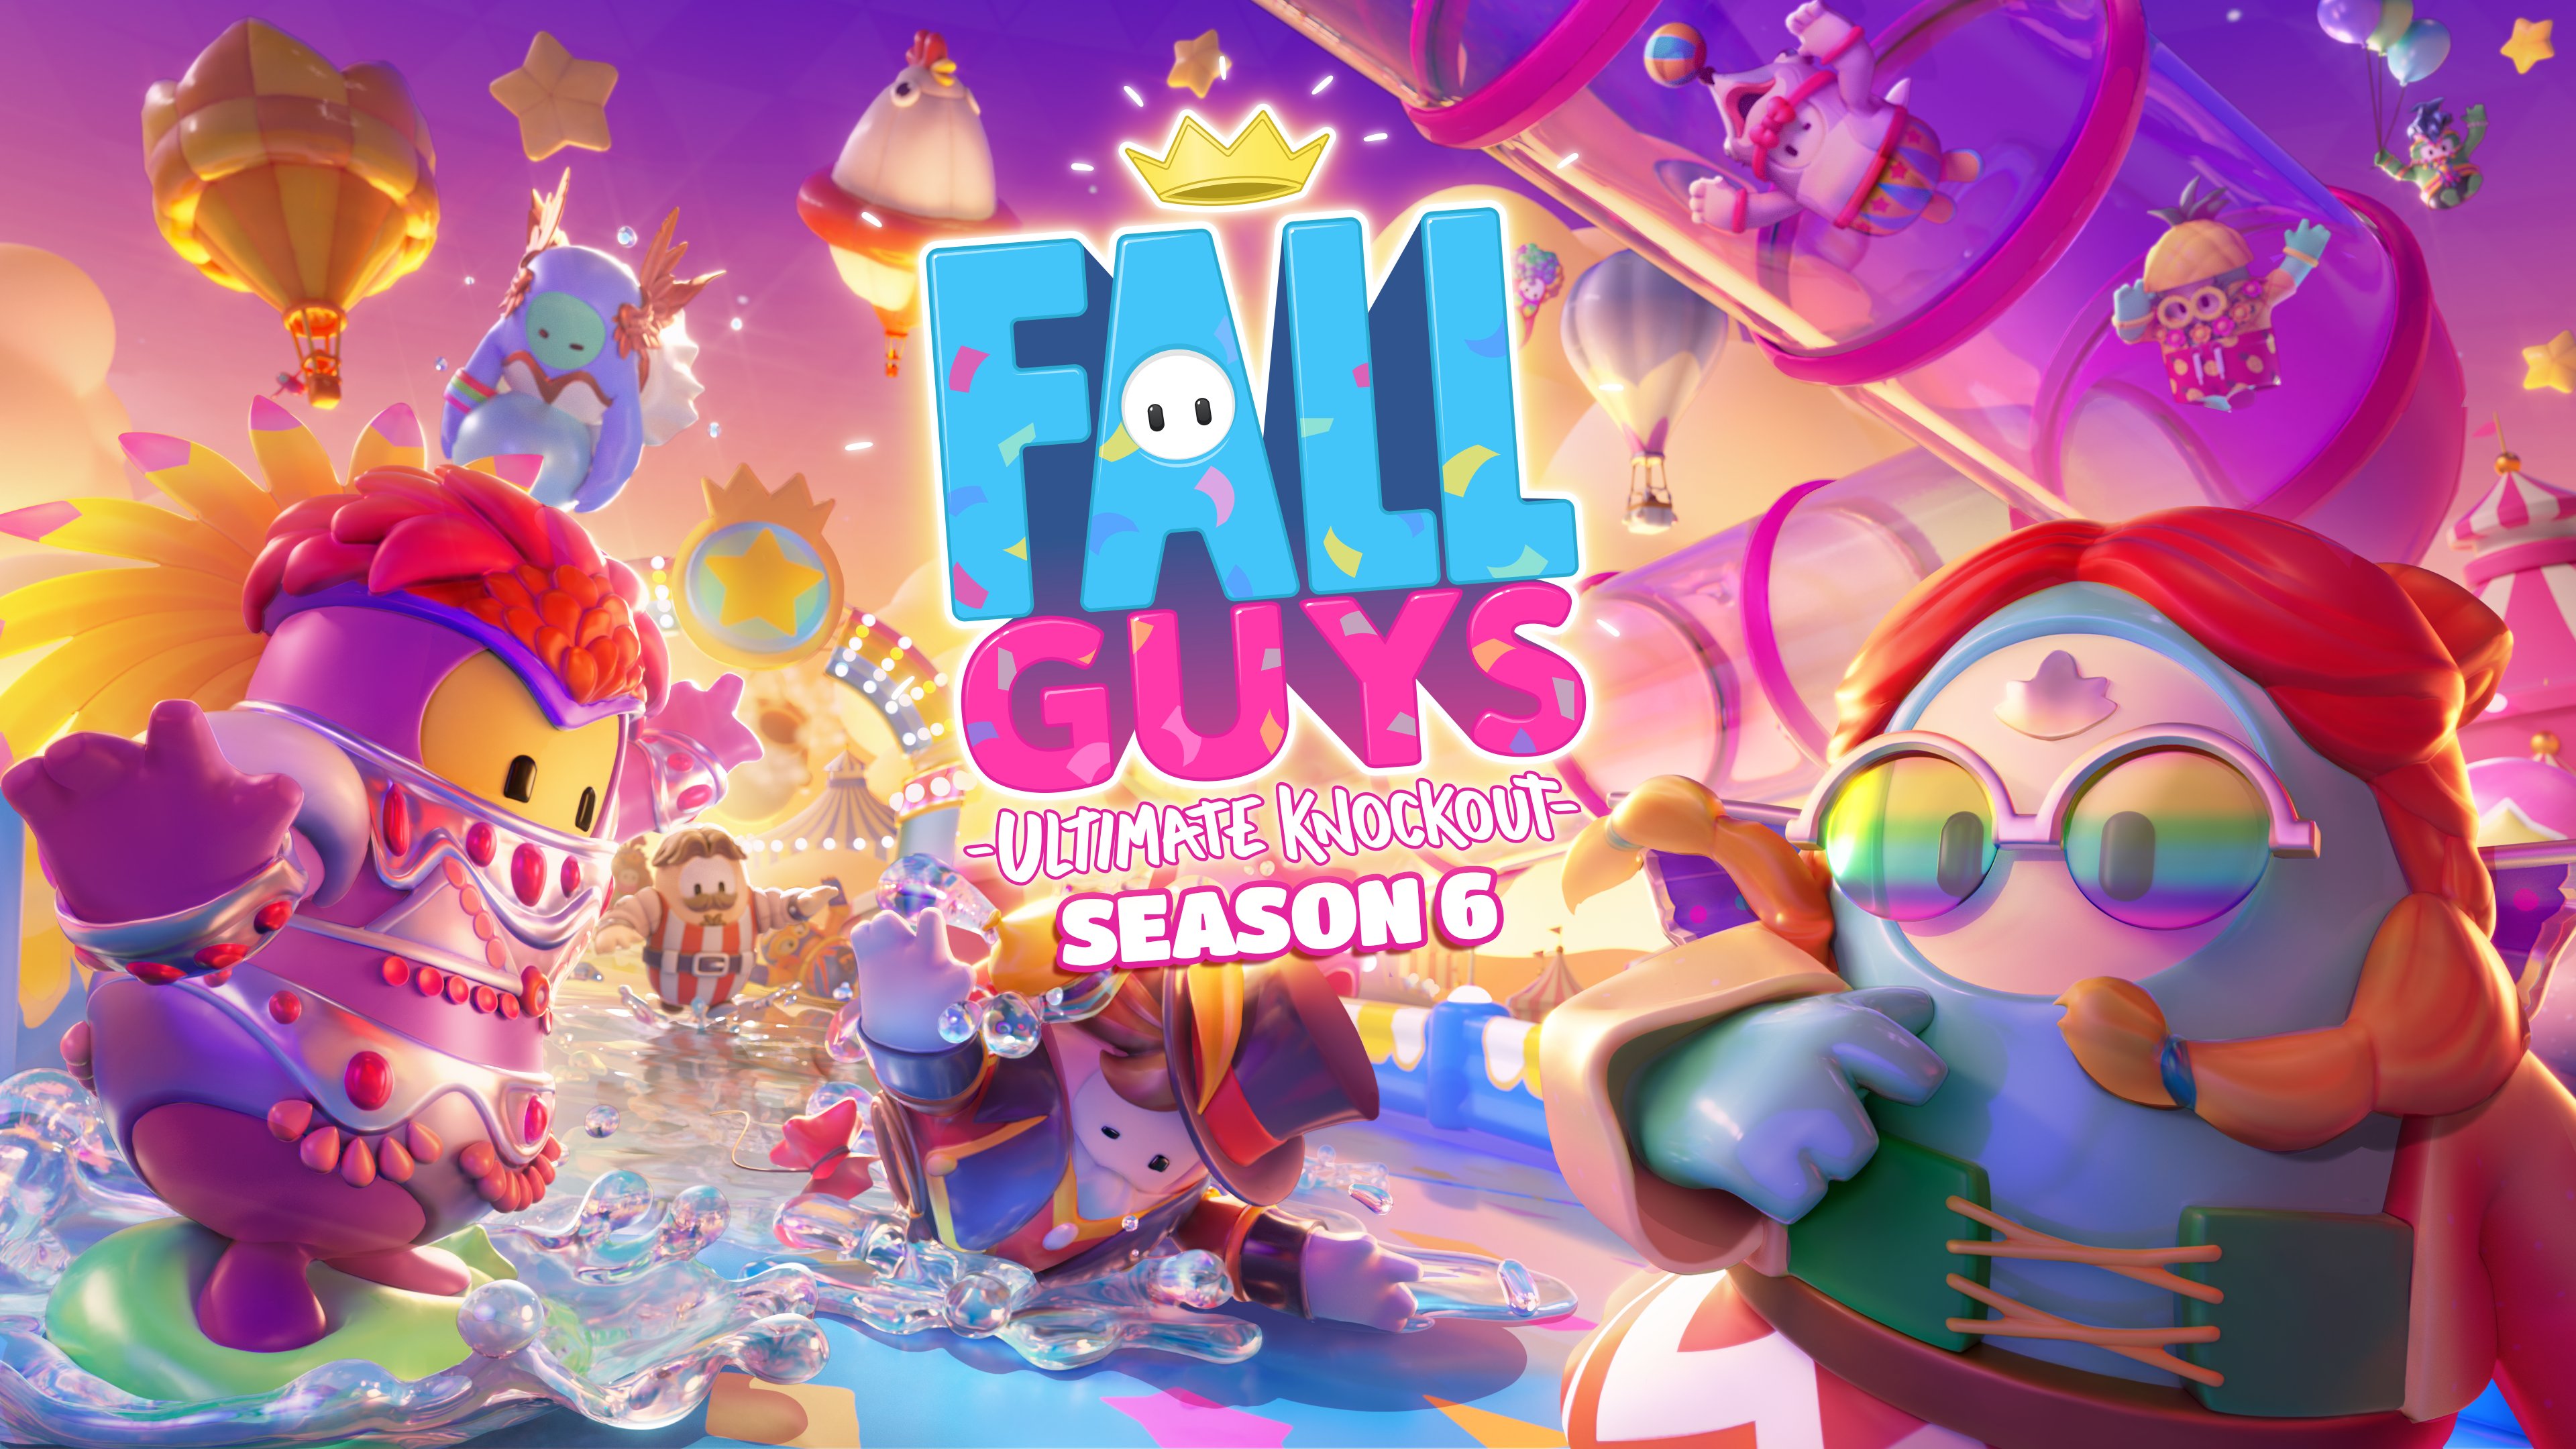 Fall Guys on X: Fall Guys is selling so well on Steam right now